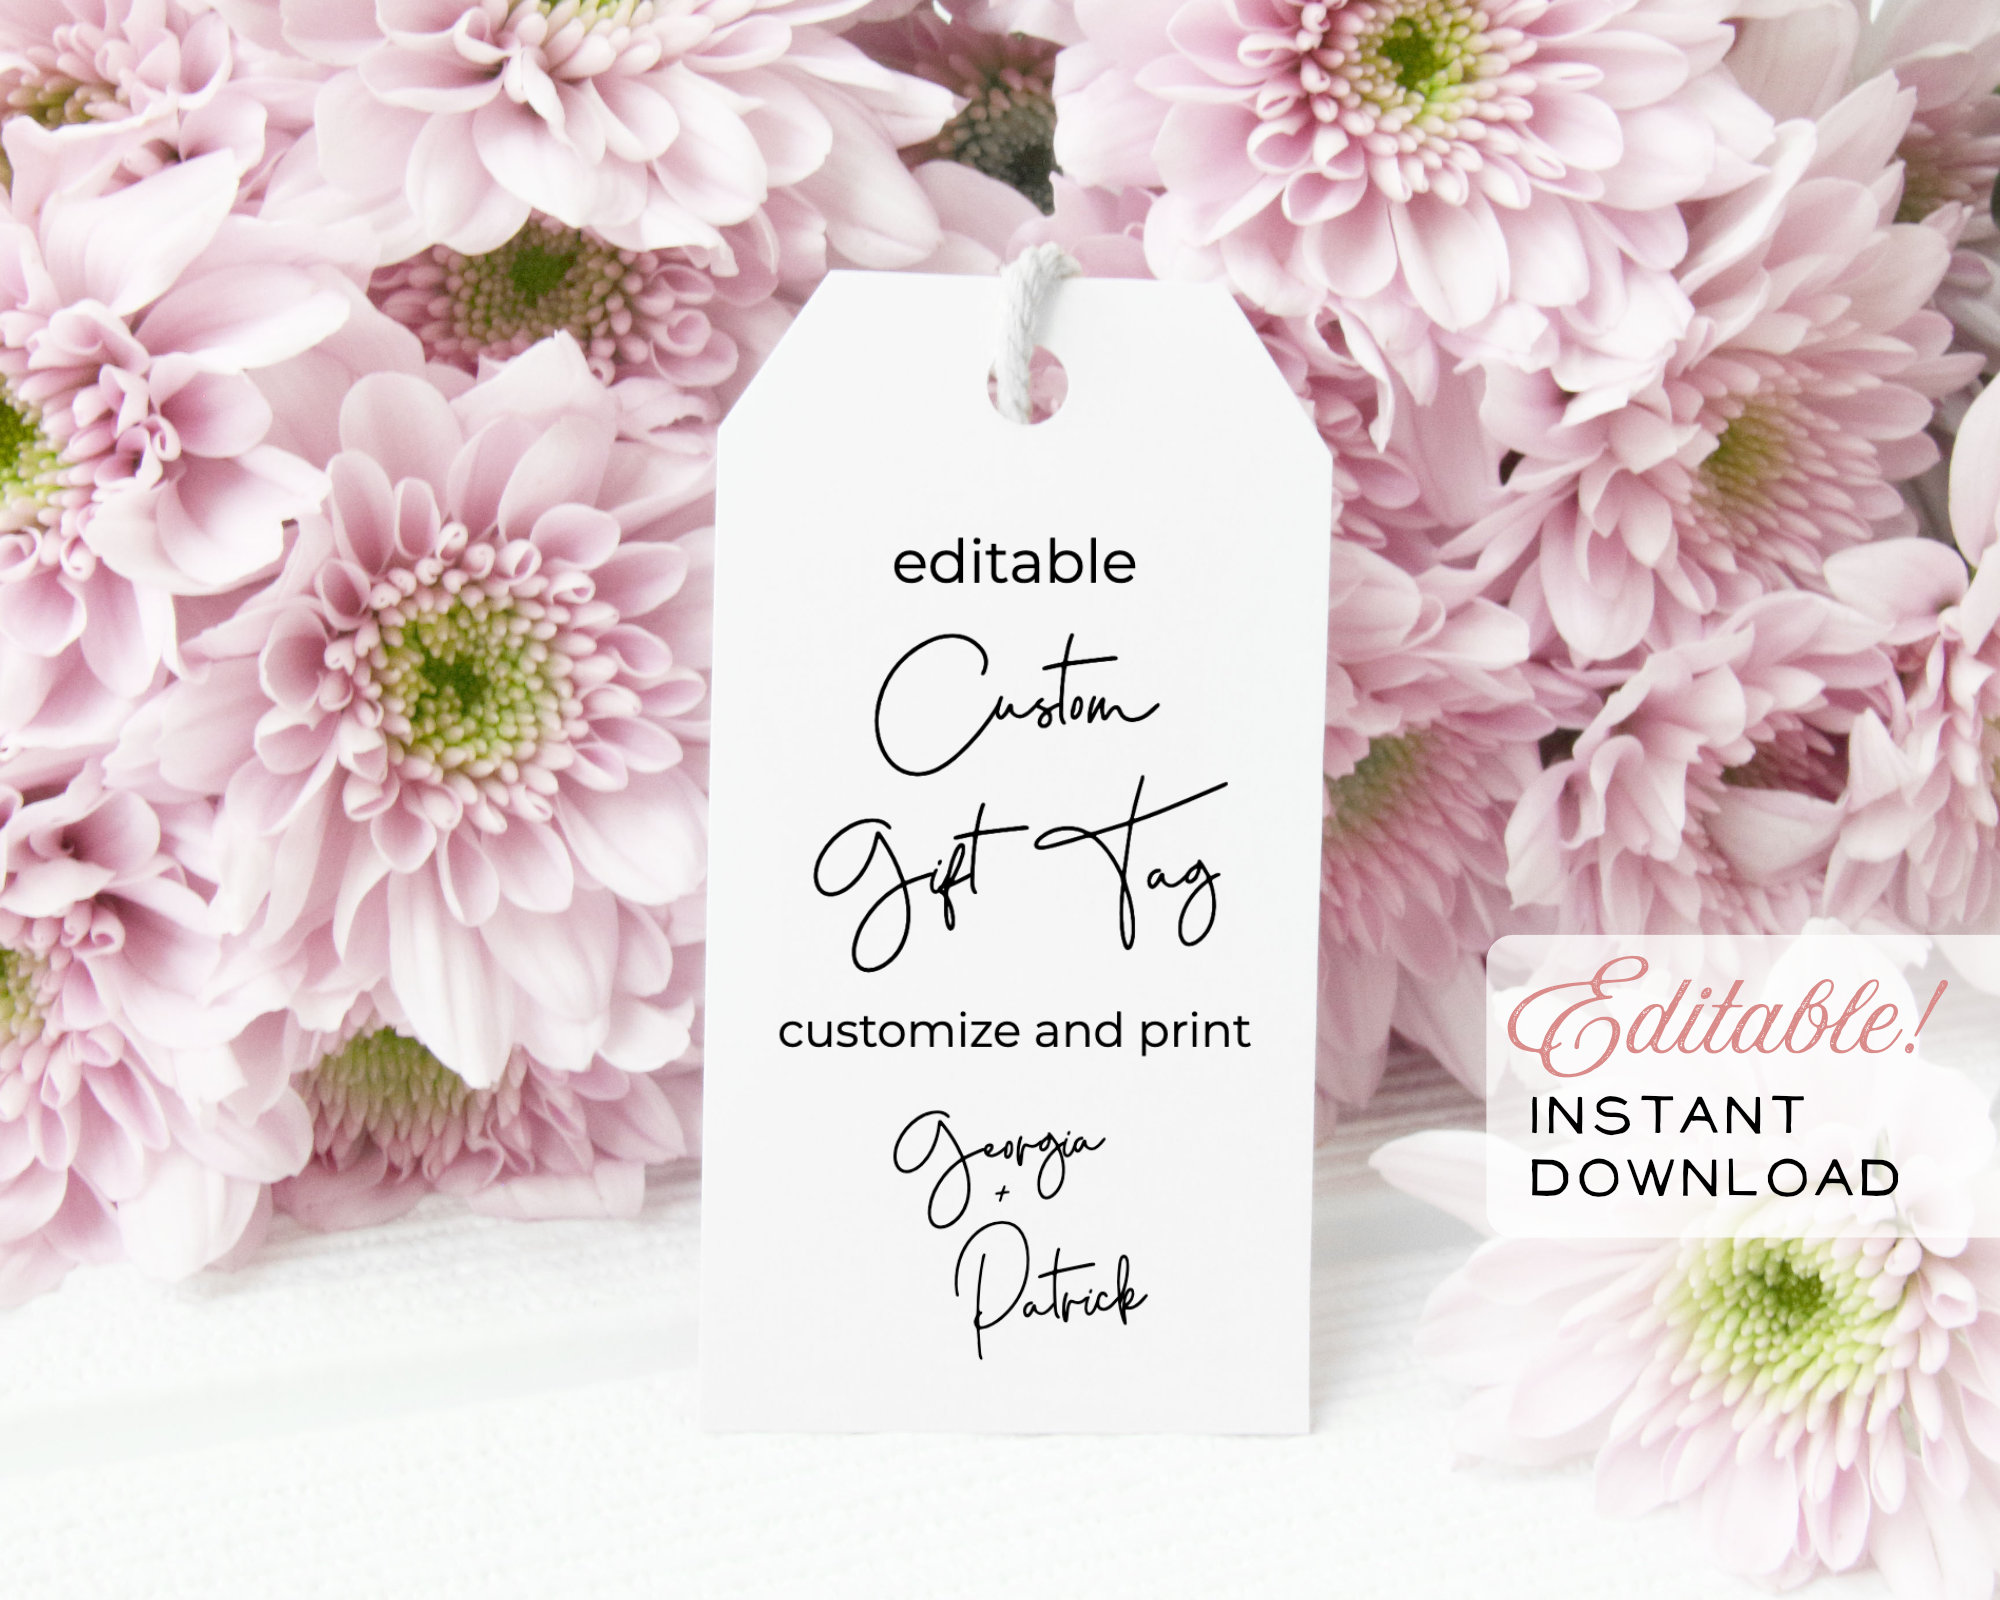 Pin on Custom Party Favor Templates & Mockups